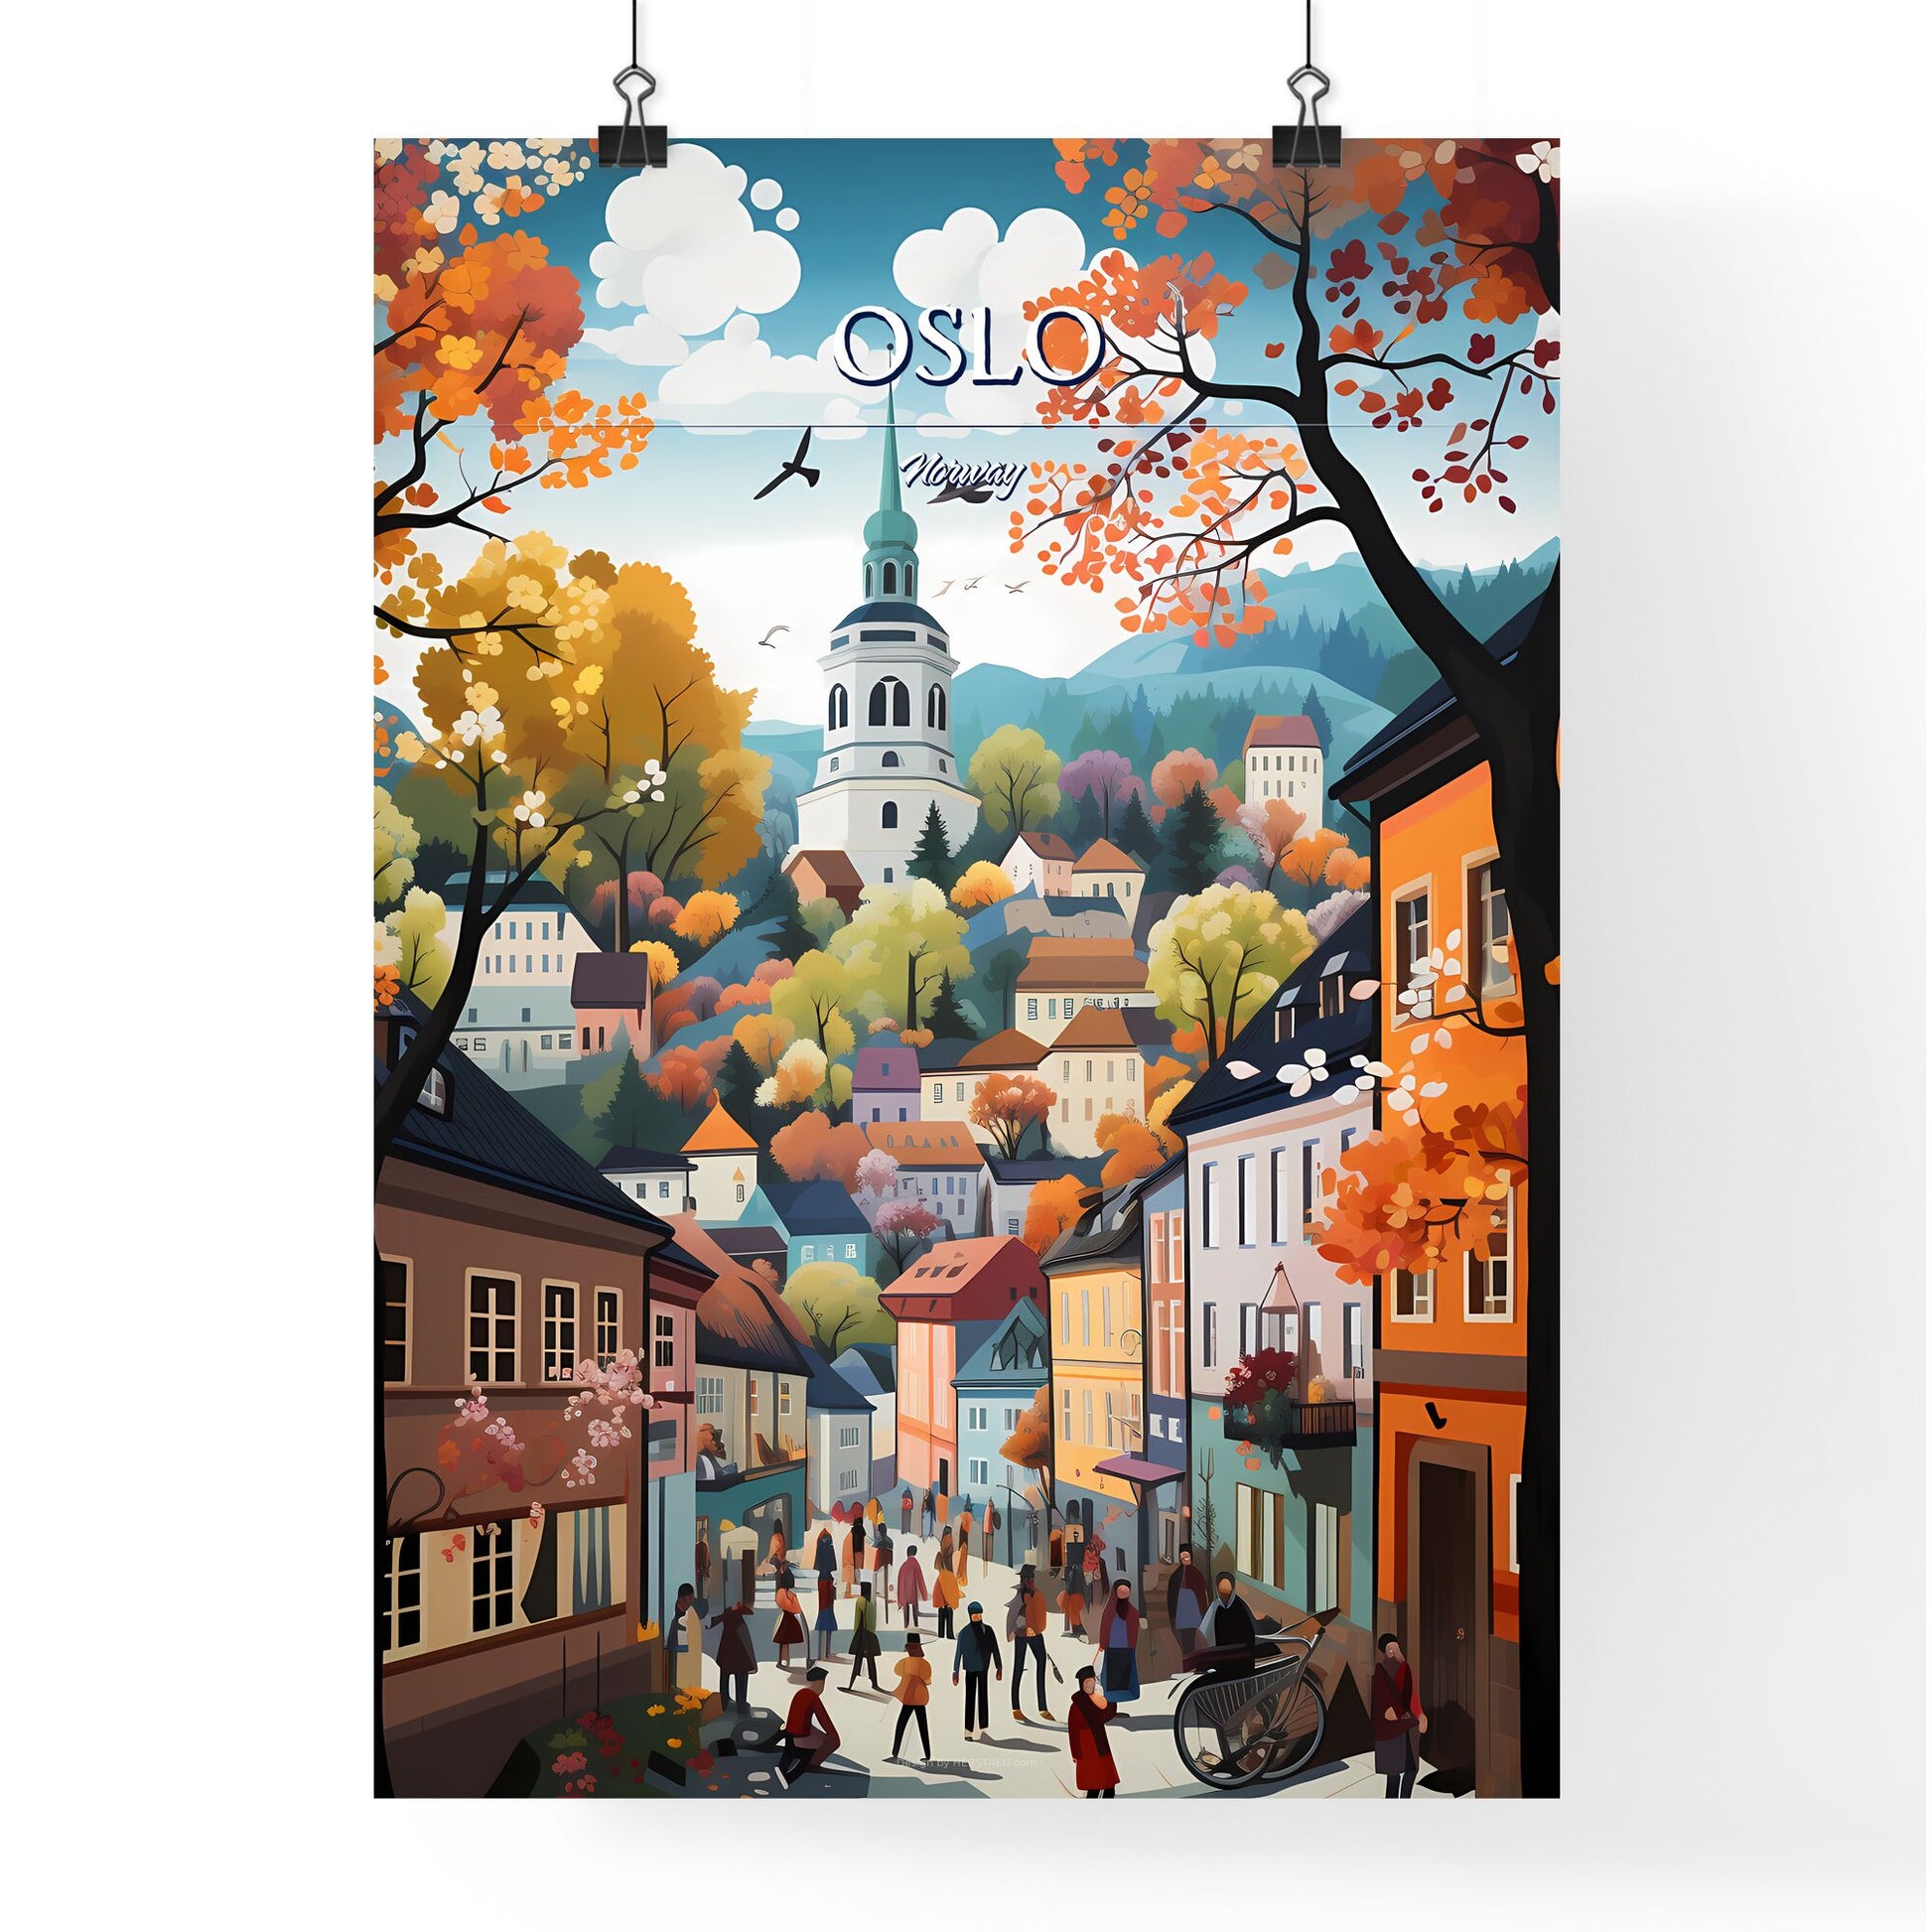 Oslo, Norway - Art print of a painting of a town with trees and a church Default Title